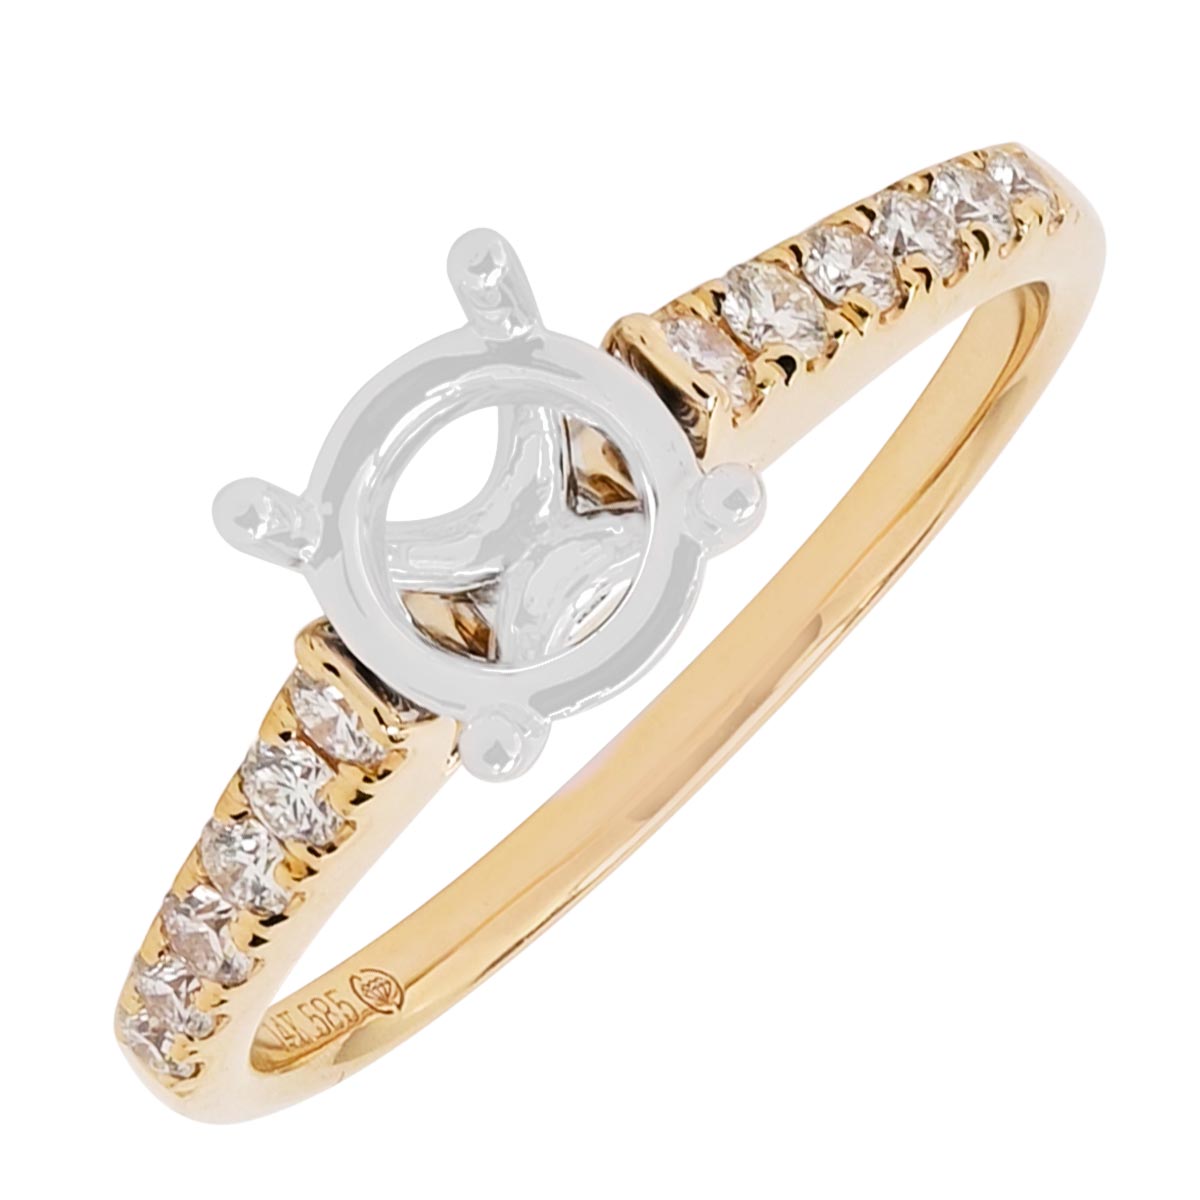 Daydream Diamond Engagement Ring Setting in 14kt Yellow Gold (1/4ct tw)